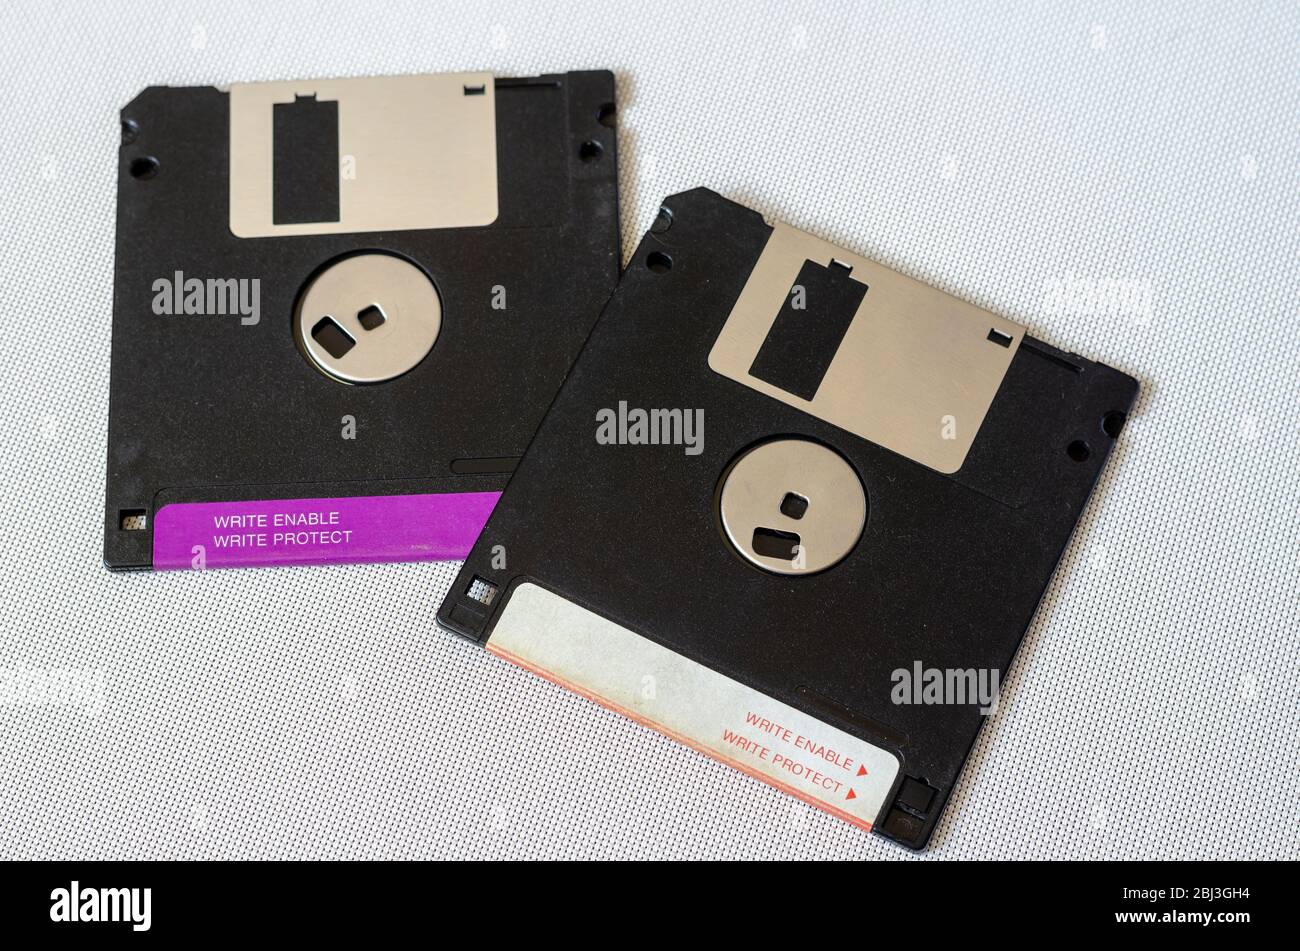 3.5 inch magnetic floppy disks. Two magnetic diskettes with a capacity of 1.44 MB. Obsolete digital data storage media. Close-up. Selective focus. Stock Photo